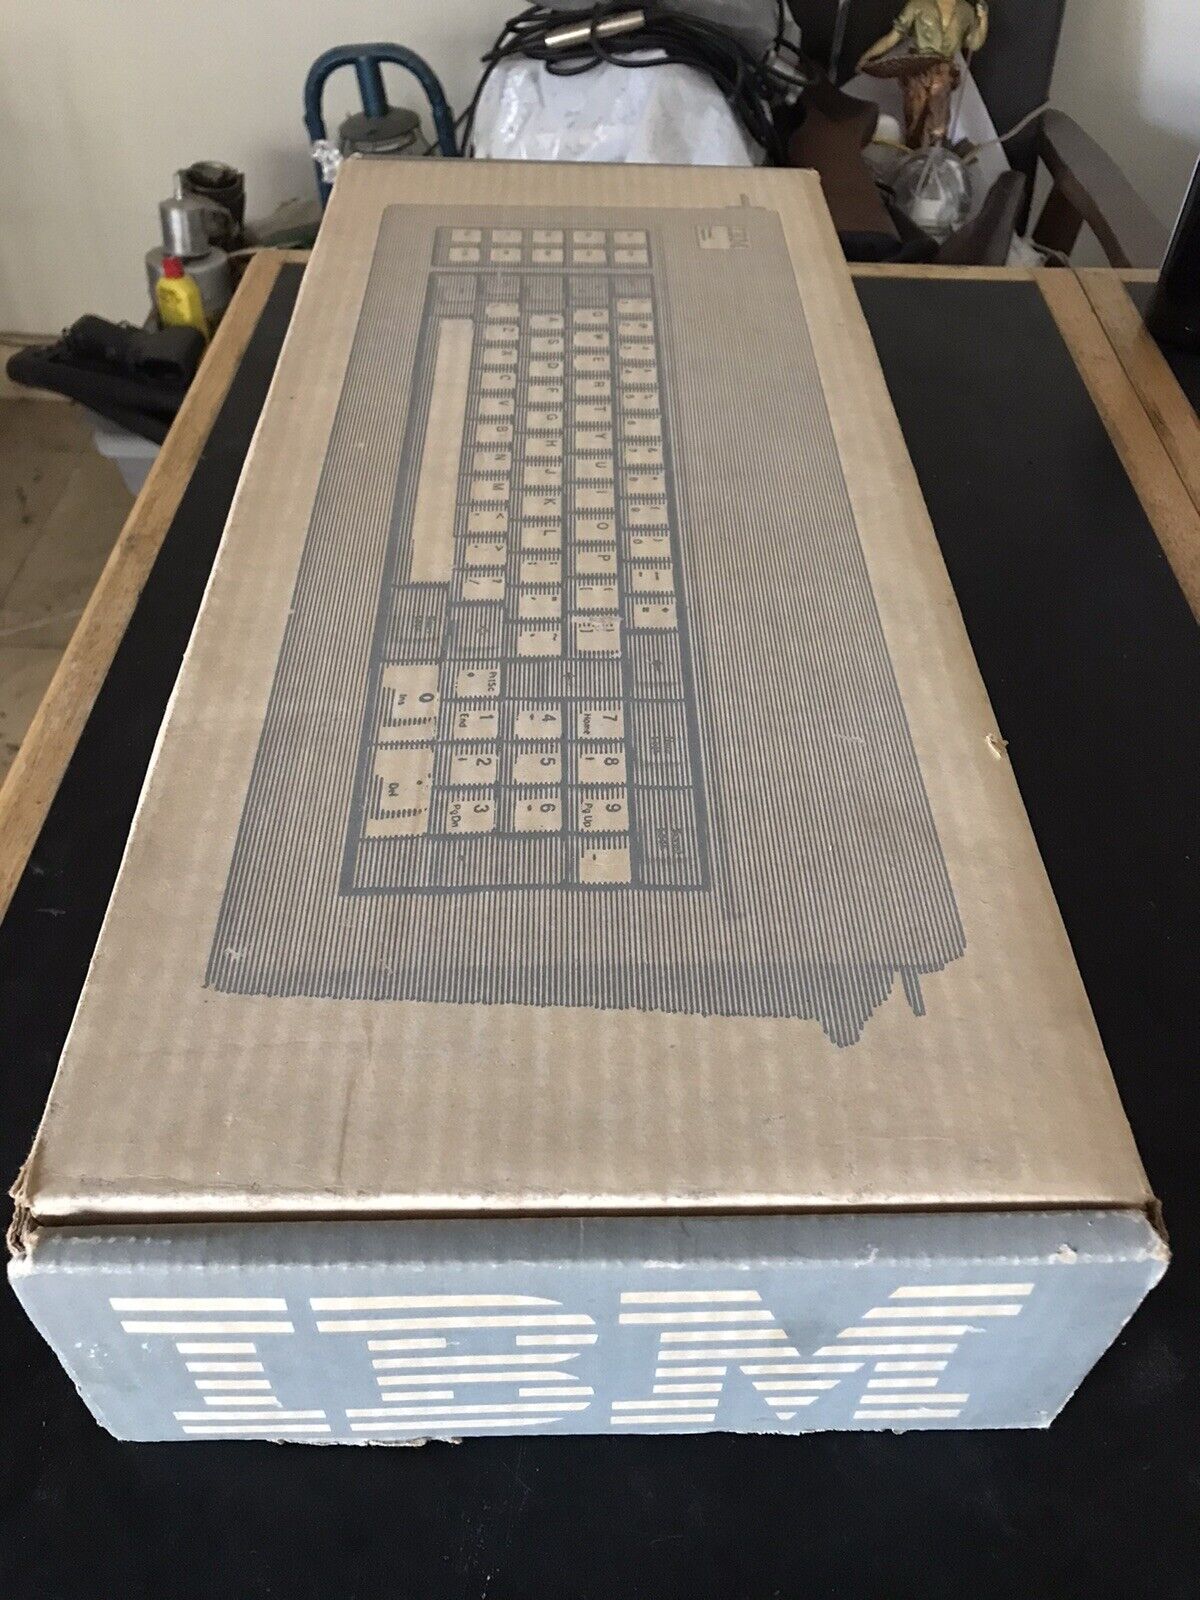 IBM Personal Computer Keyboard 1501100 New Old Stock - NOS USA Made